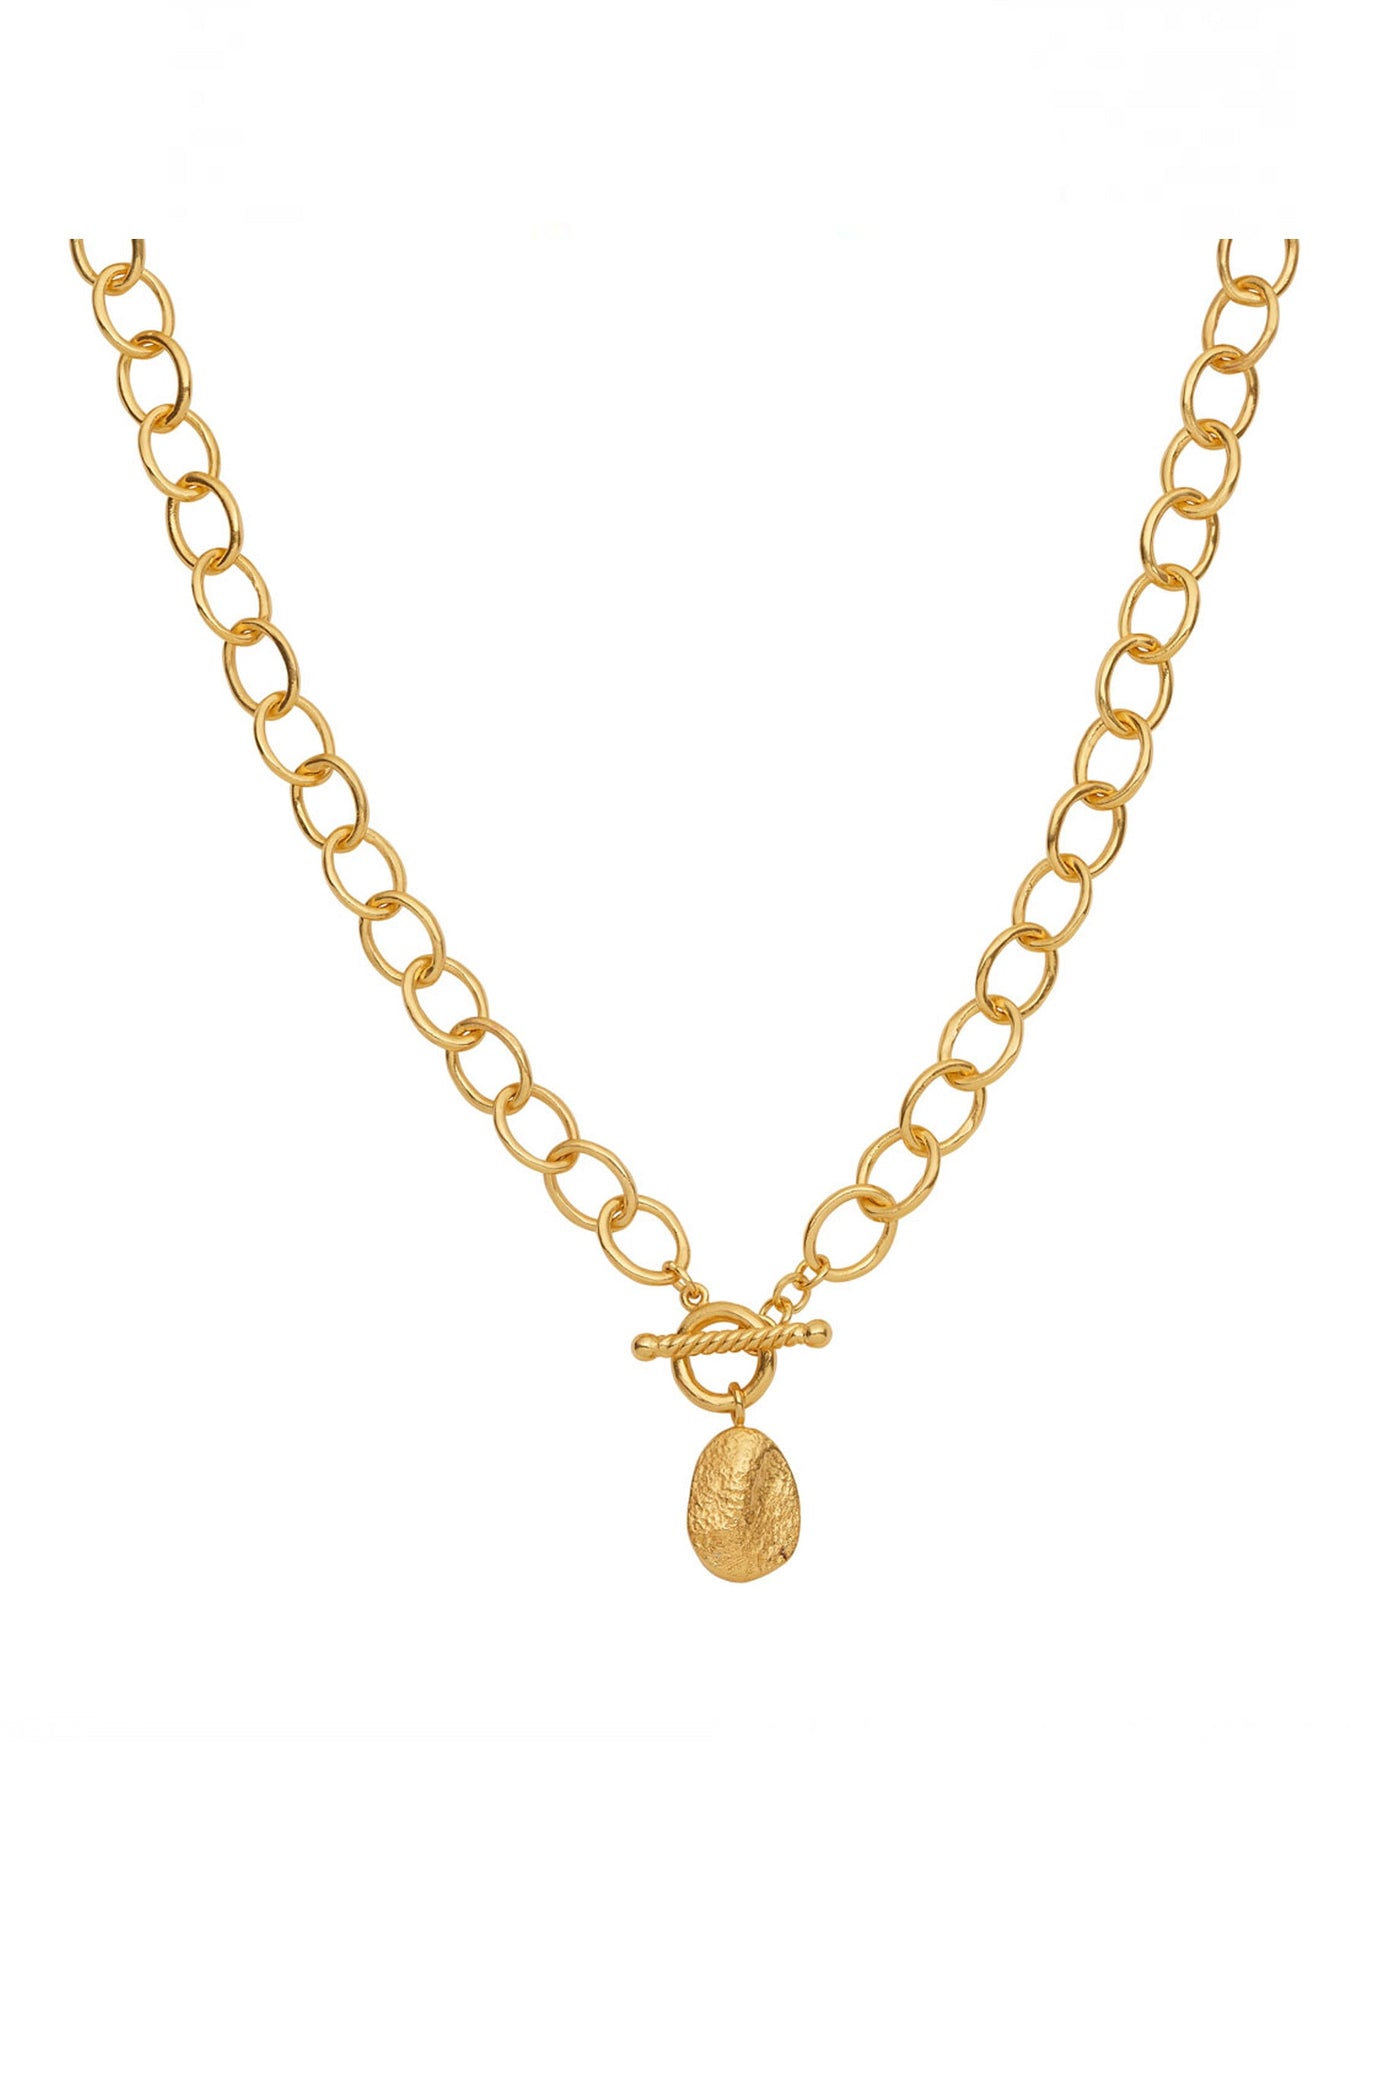 Amber Sceats Coco Necklace - Gold